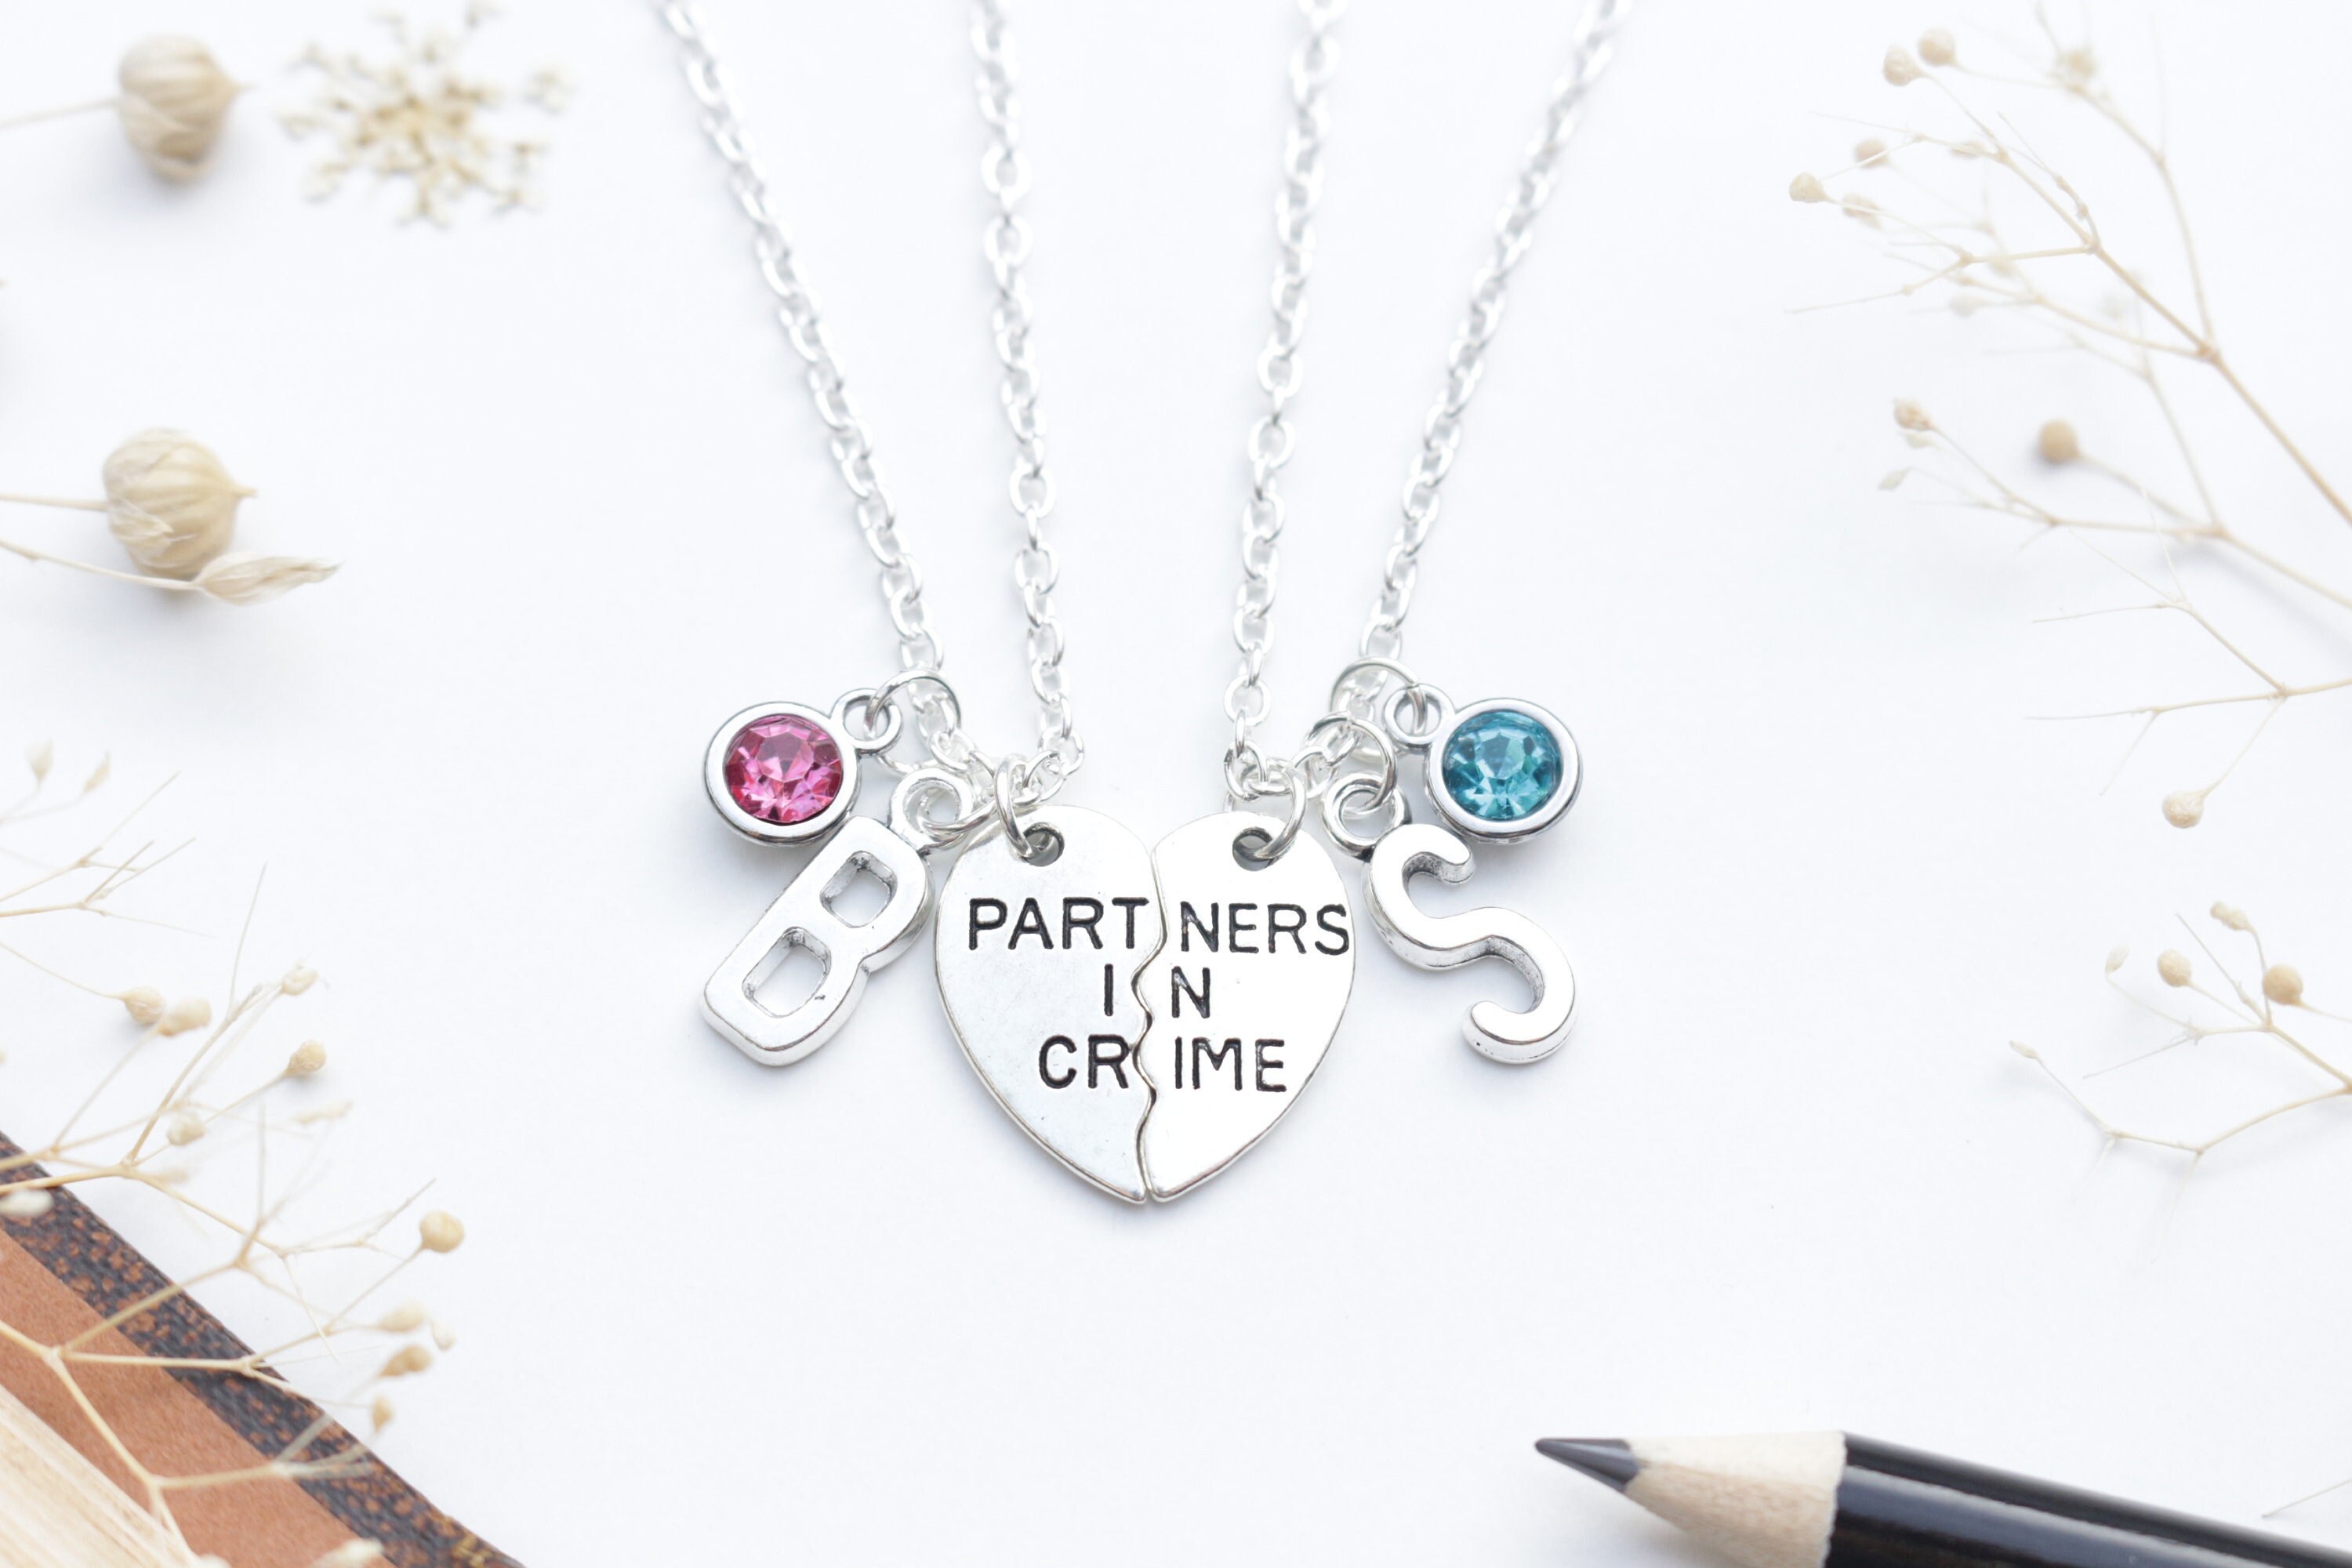 Thelma and Louise Jewelry - Necklace - Thelma and Louise Necklace Set -  Best friends - Partners in Crime Jewelry